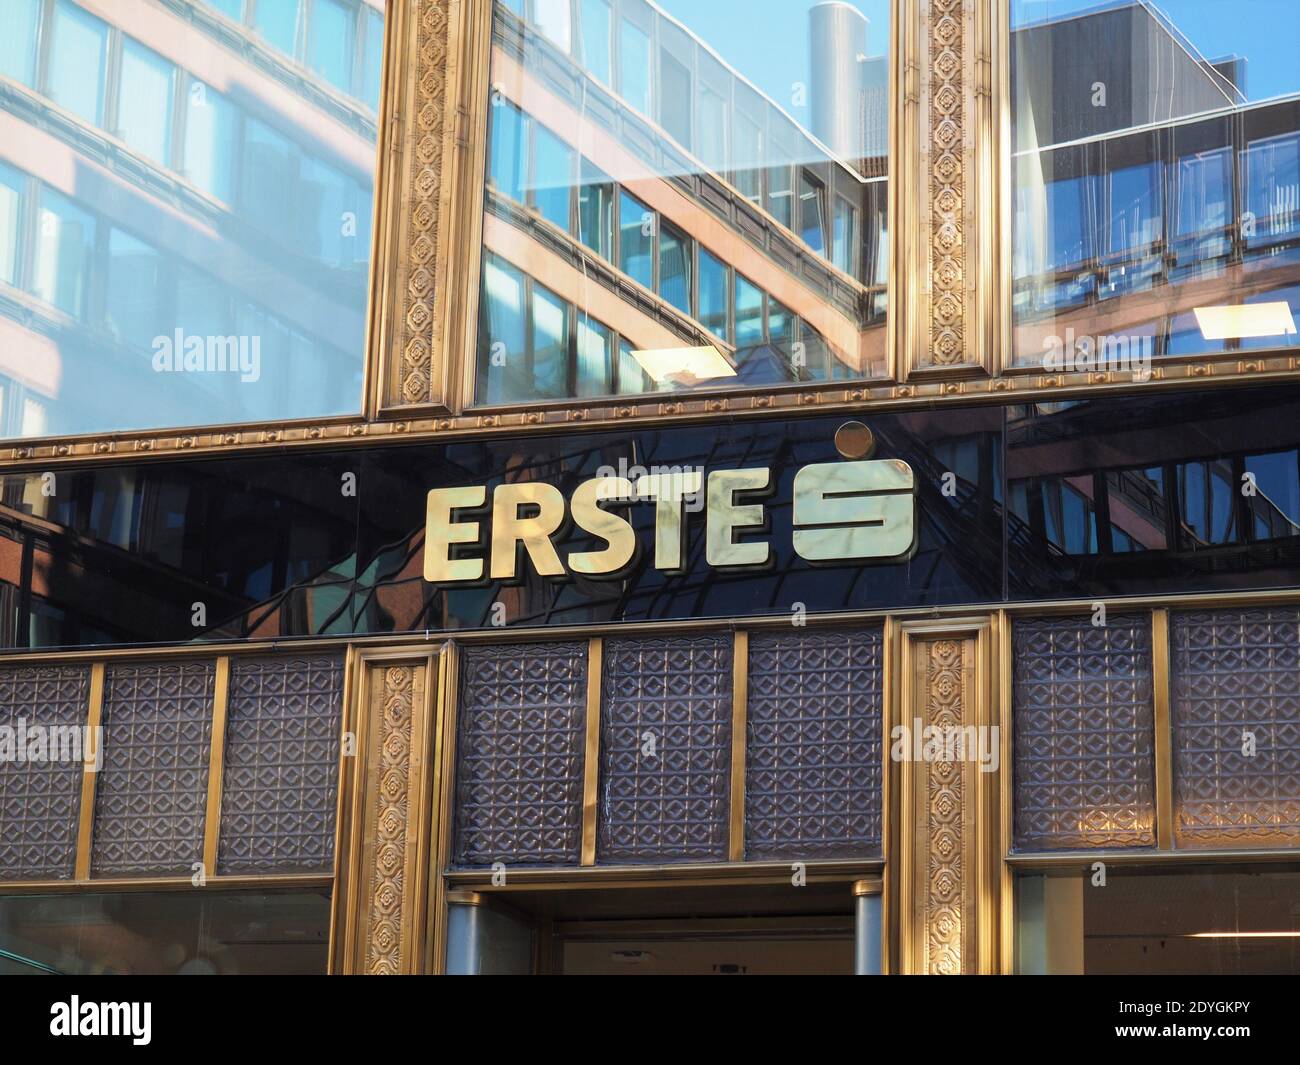 Budapest, Hungary - October 08, 2020: Erste bank logo on the facade of an old historical building building in Budapest downtown Stock Photo